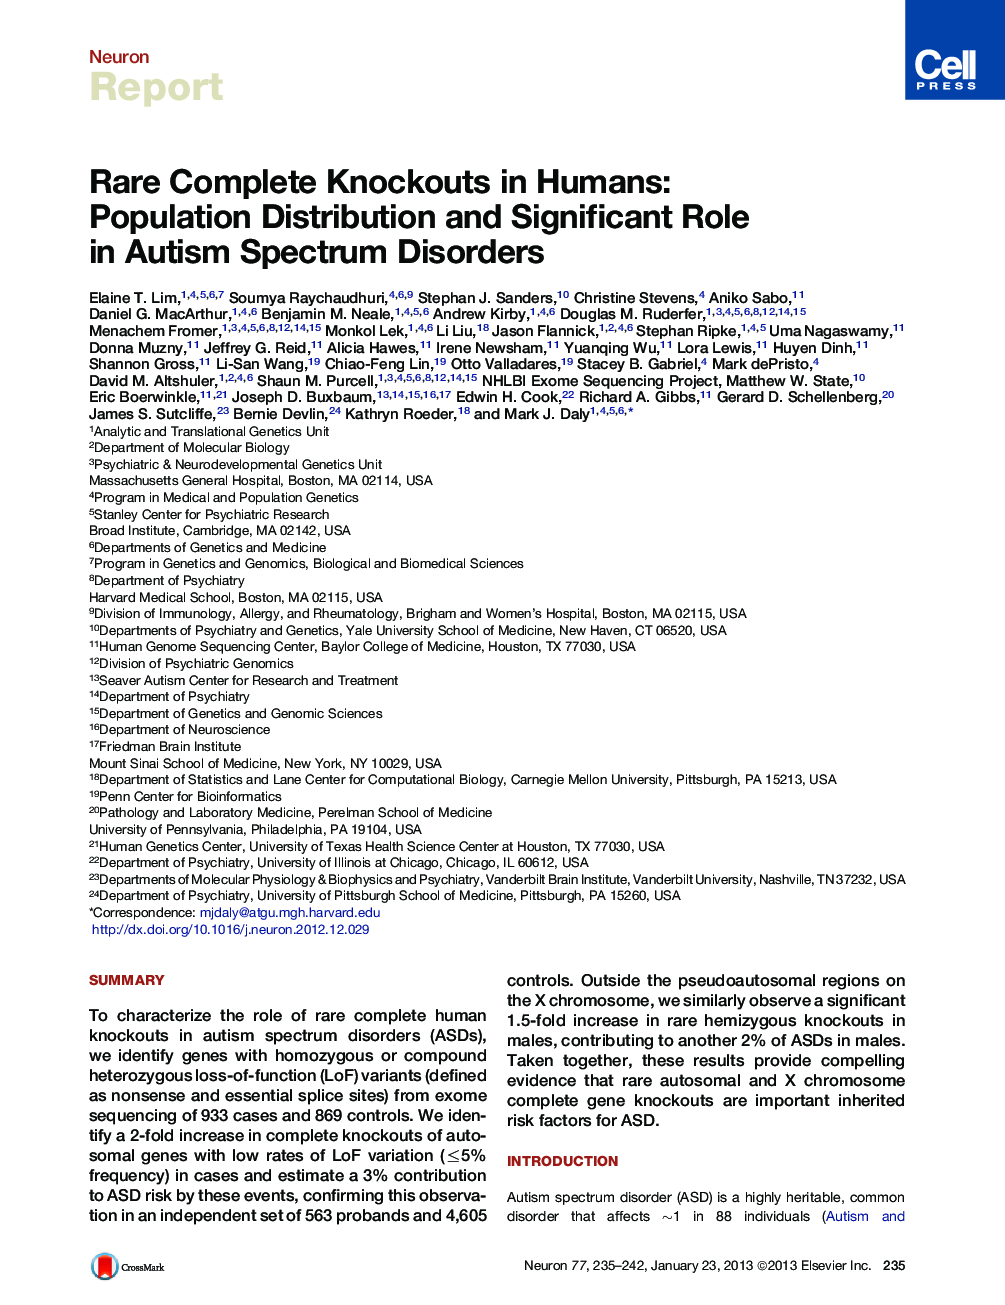 Rare Complete Knockouts in Humans: Population Distribution and Significant Role in Autism Spectrum Disorders